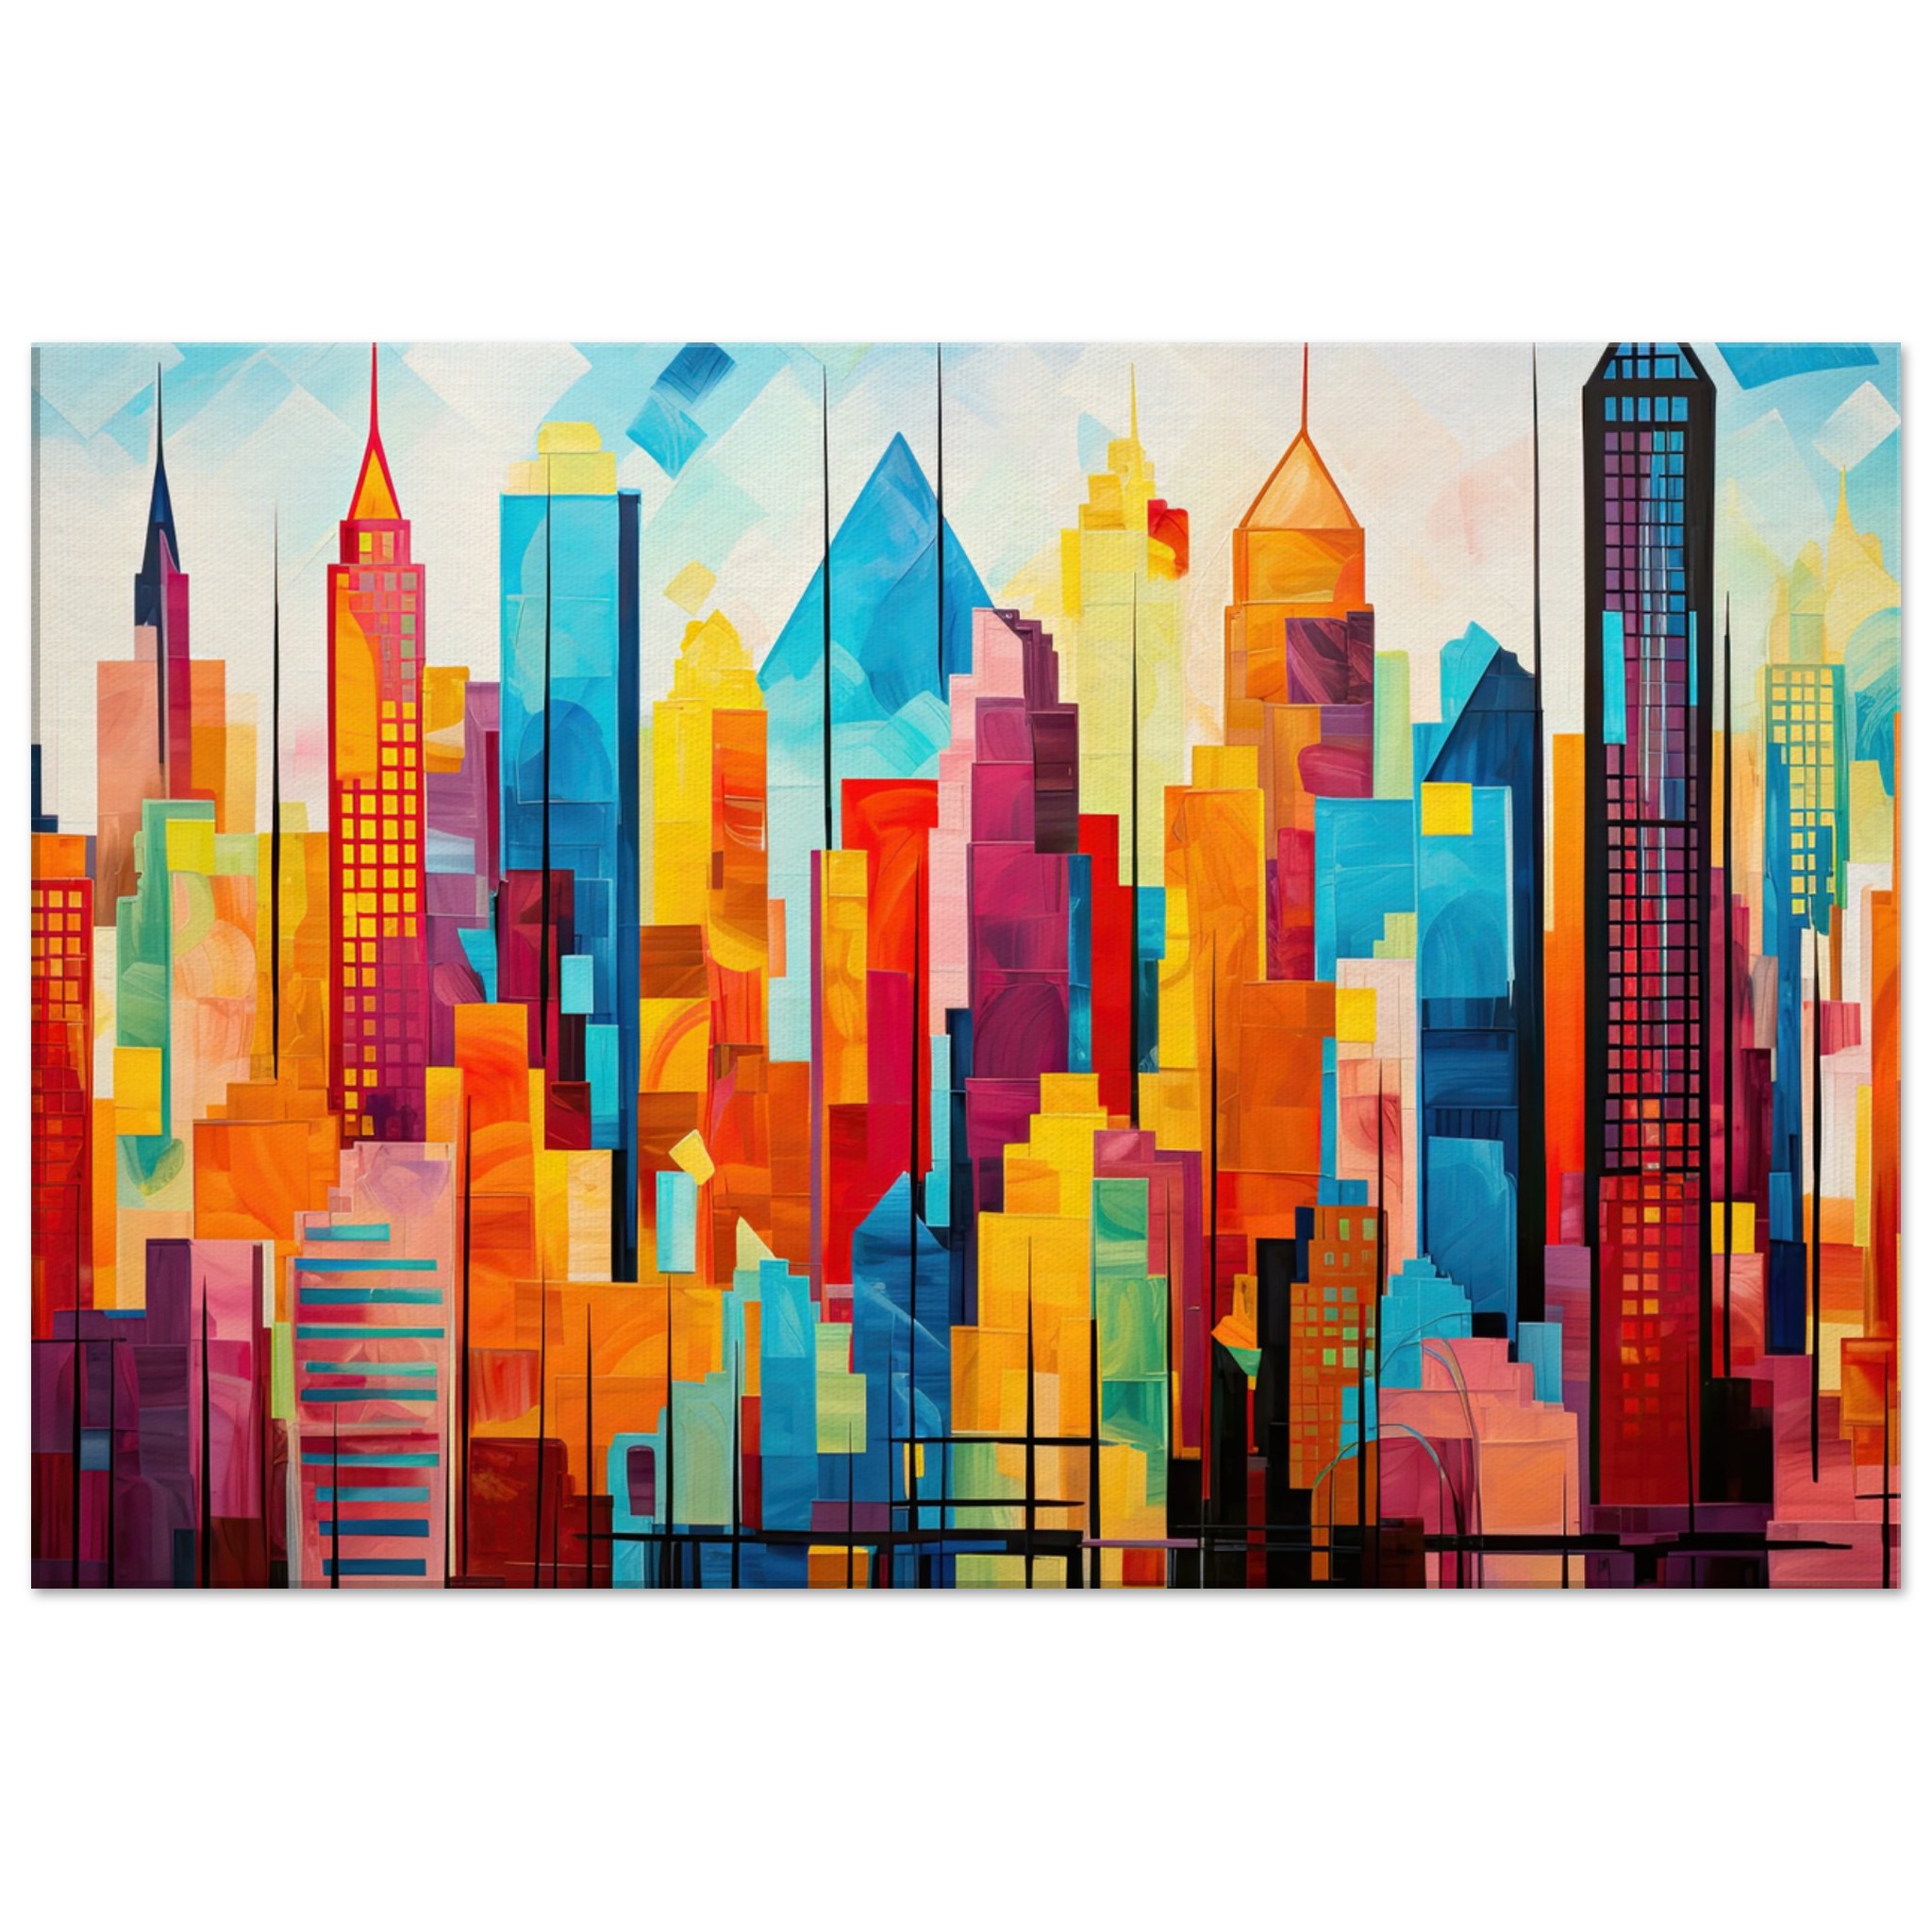 Colorful Abstract Cityscape Painted – Canvas Print – 50×75 cm / 20×30″, Slim